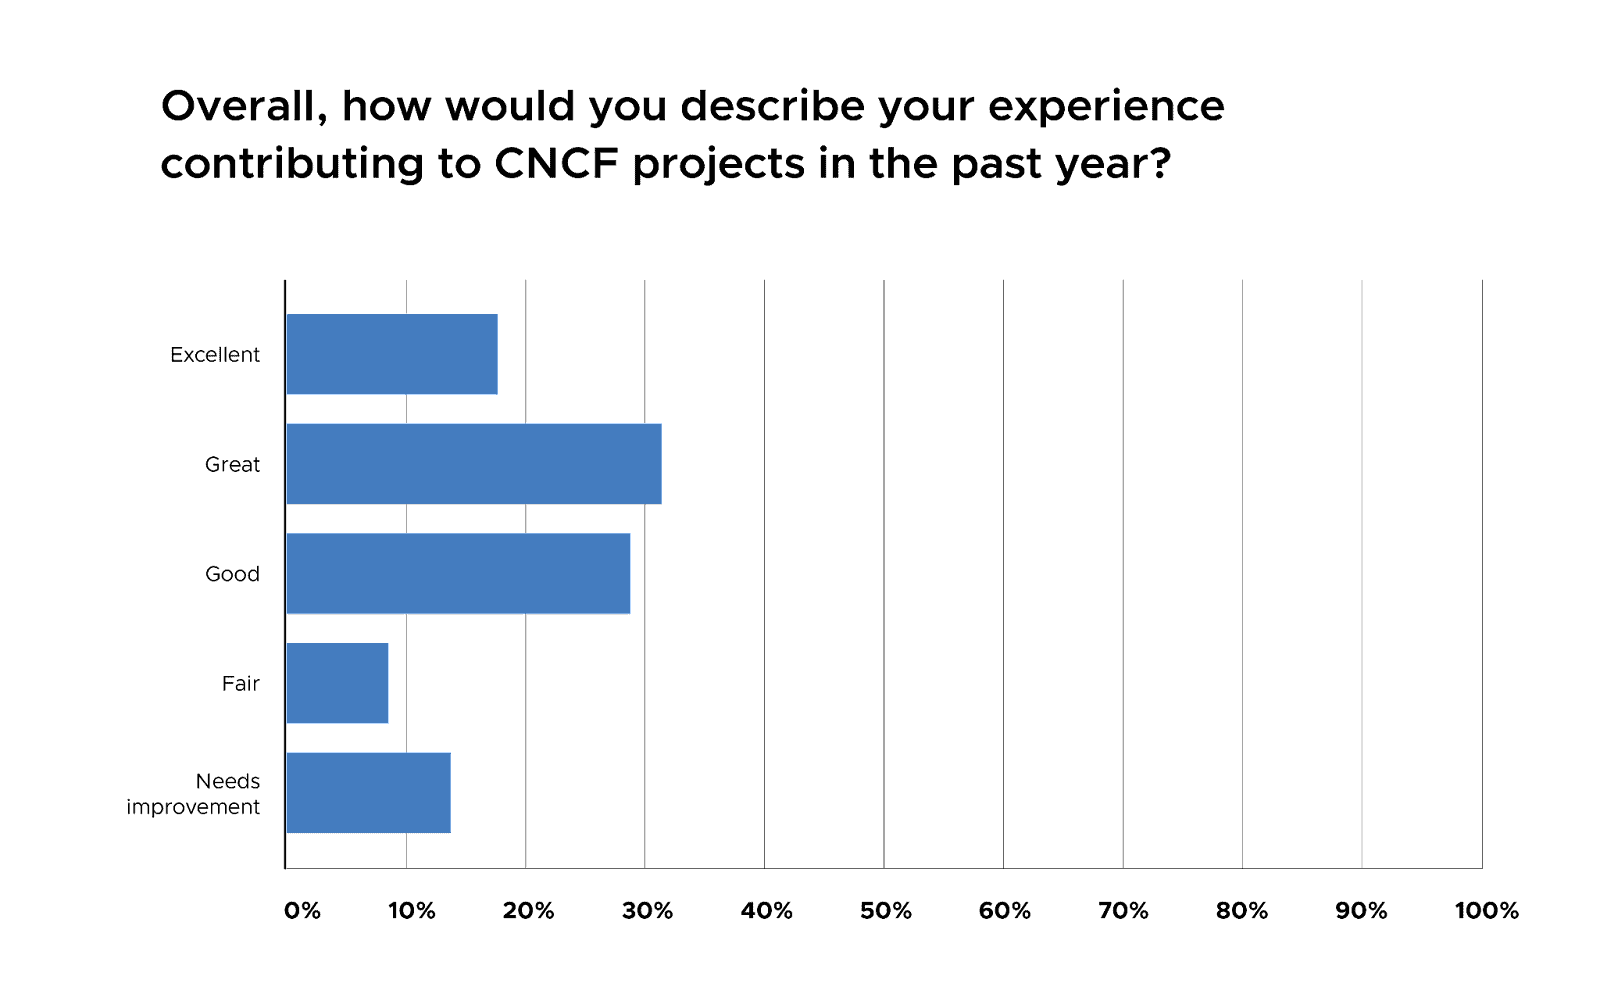 Bar chart showing 31% of respondents feeling great in contributing to CNCF projects in the past year